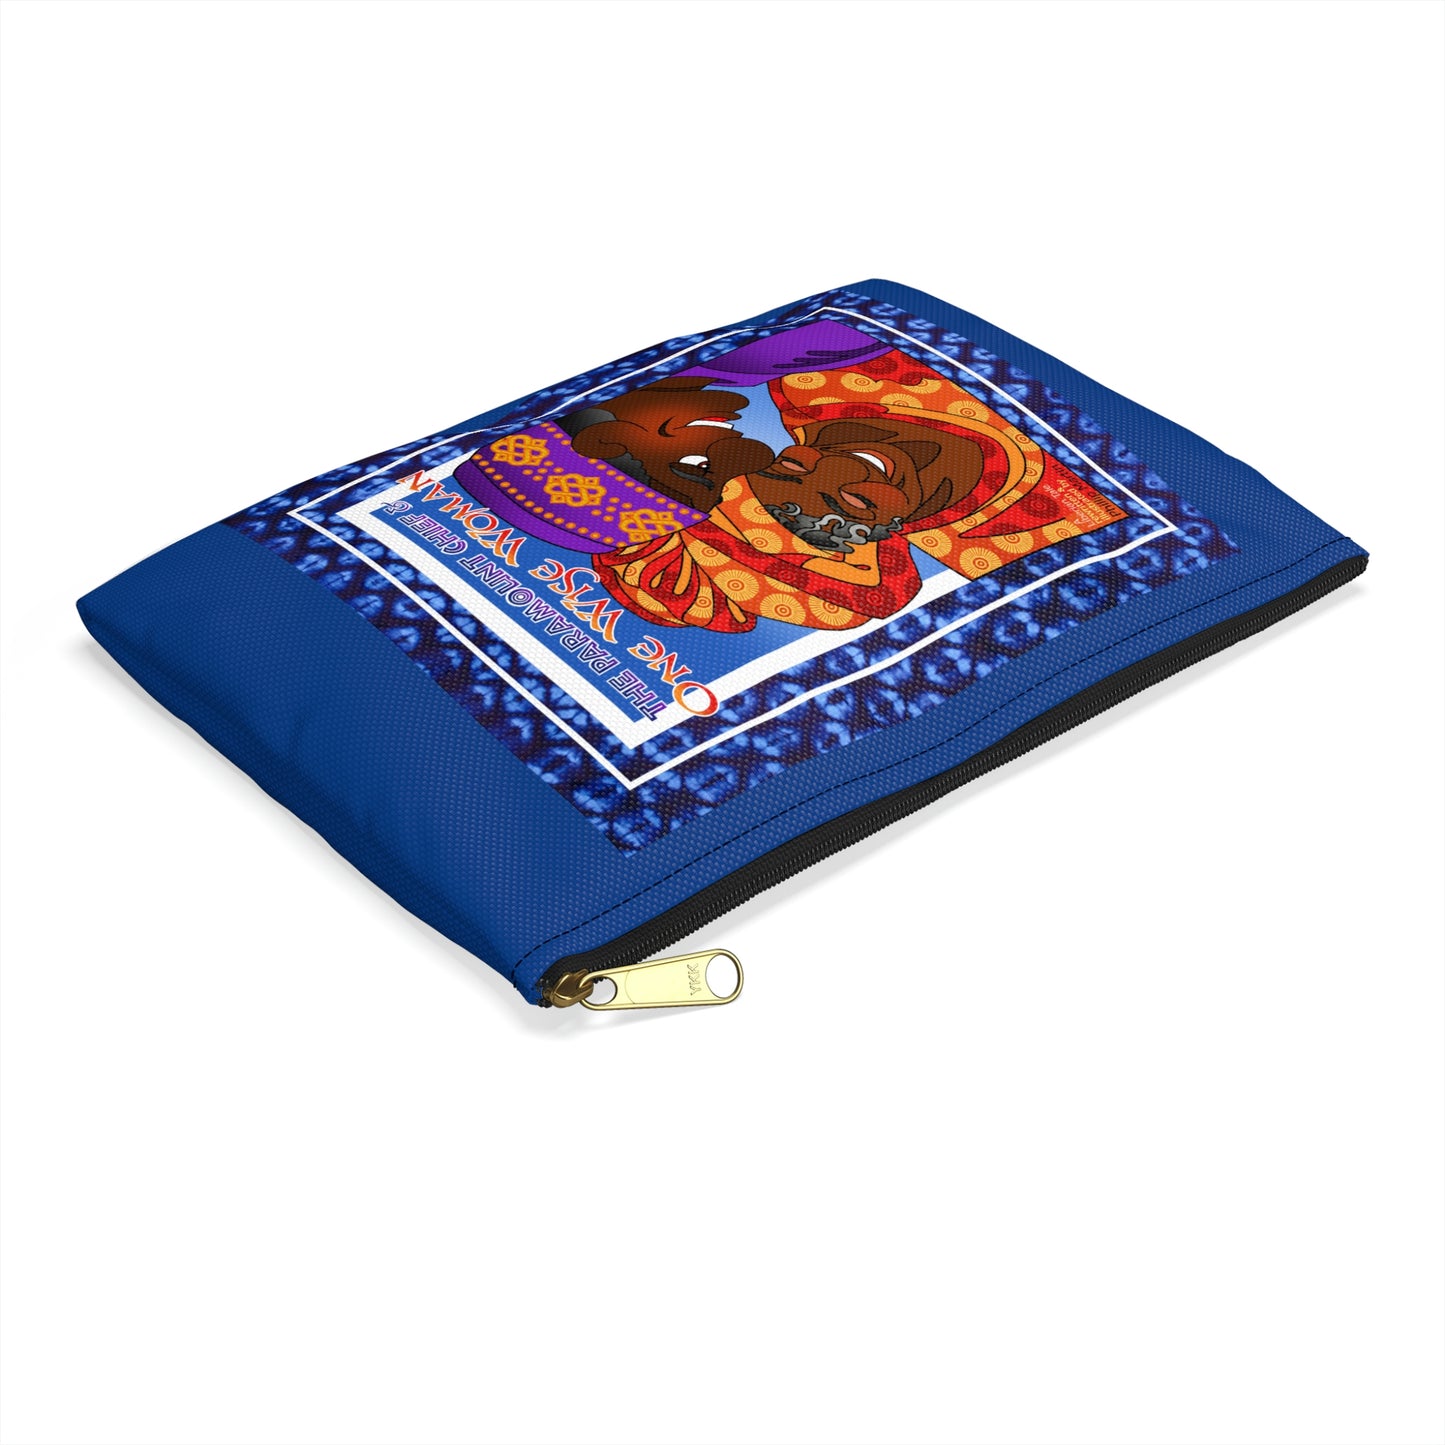 The Paramount Chief and One Wise Woman Accessory Pouch